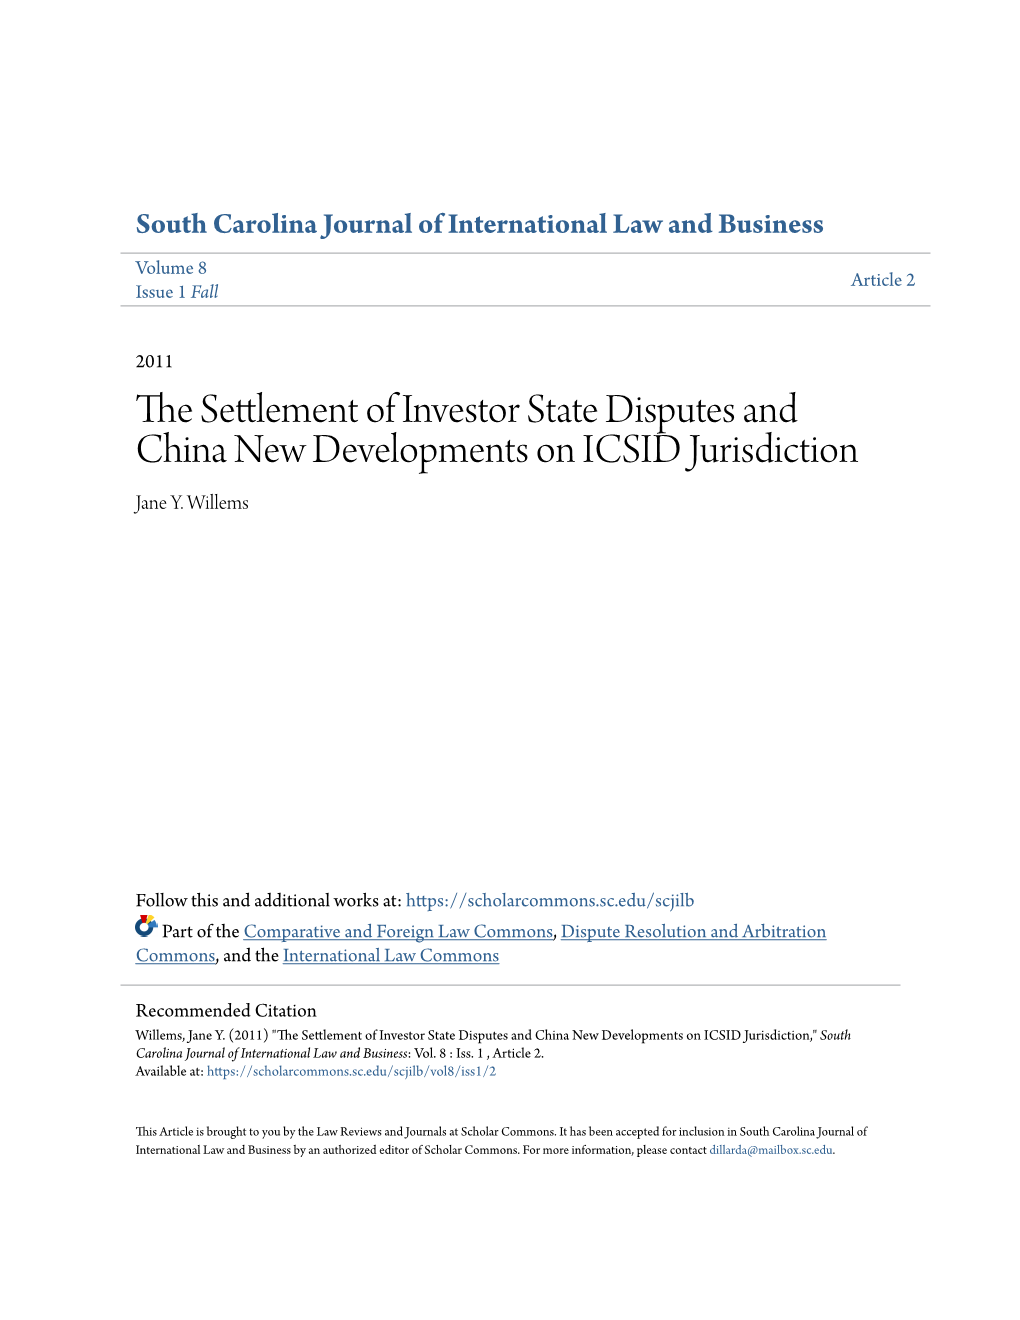 The Settlement of Investor State Disputes and China New